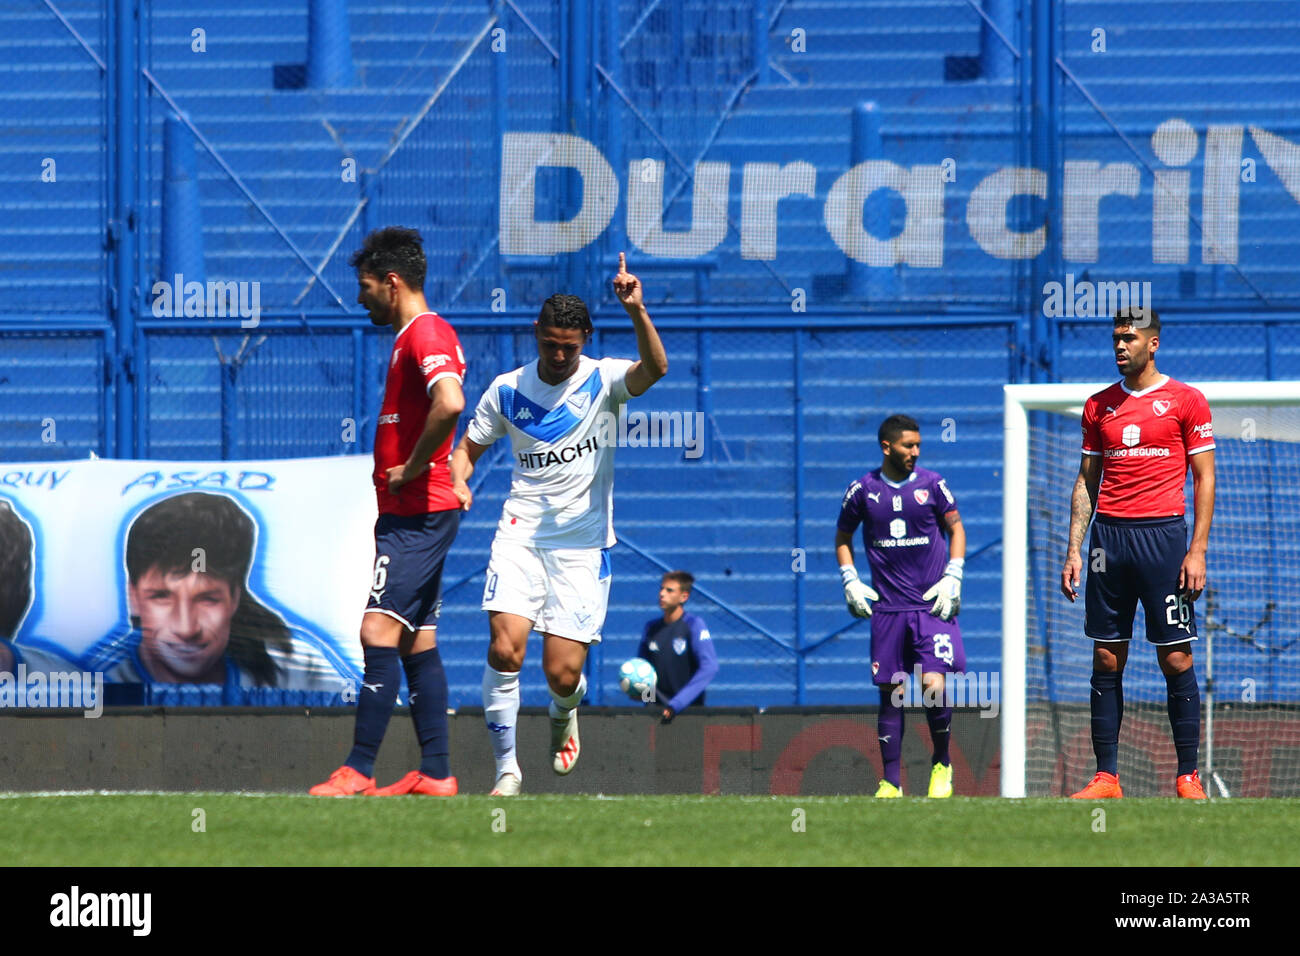 BUENOS AIRES, 06.10.2019: Maxi Romero during the match between Velez Sarsfield and Independiente at José Amalfitani Stadium in Buenos Aires, Argentina Stock Photo